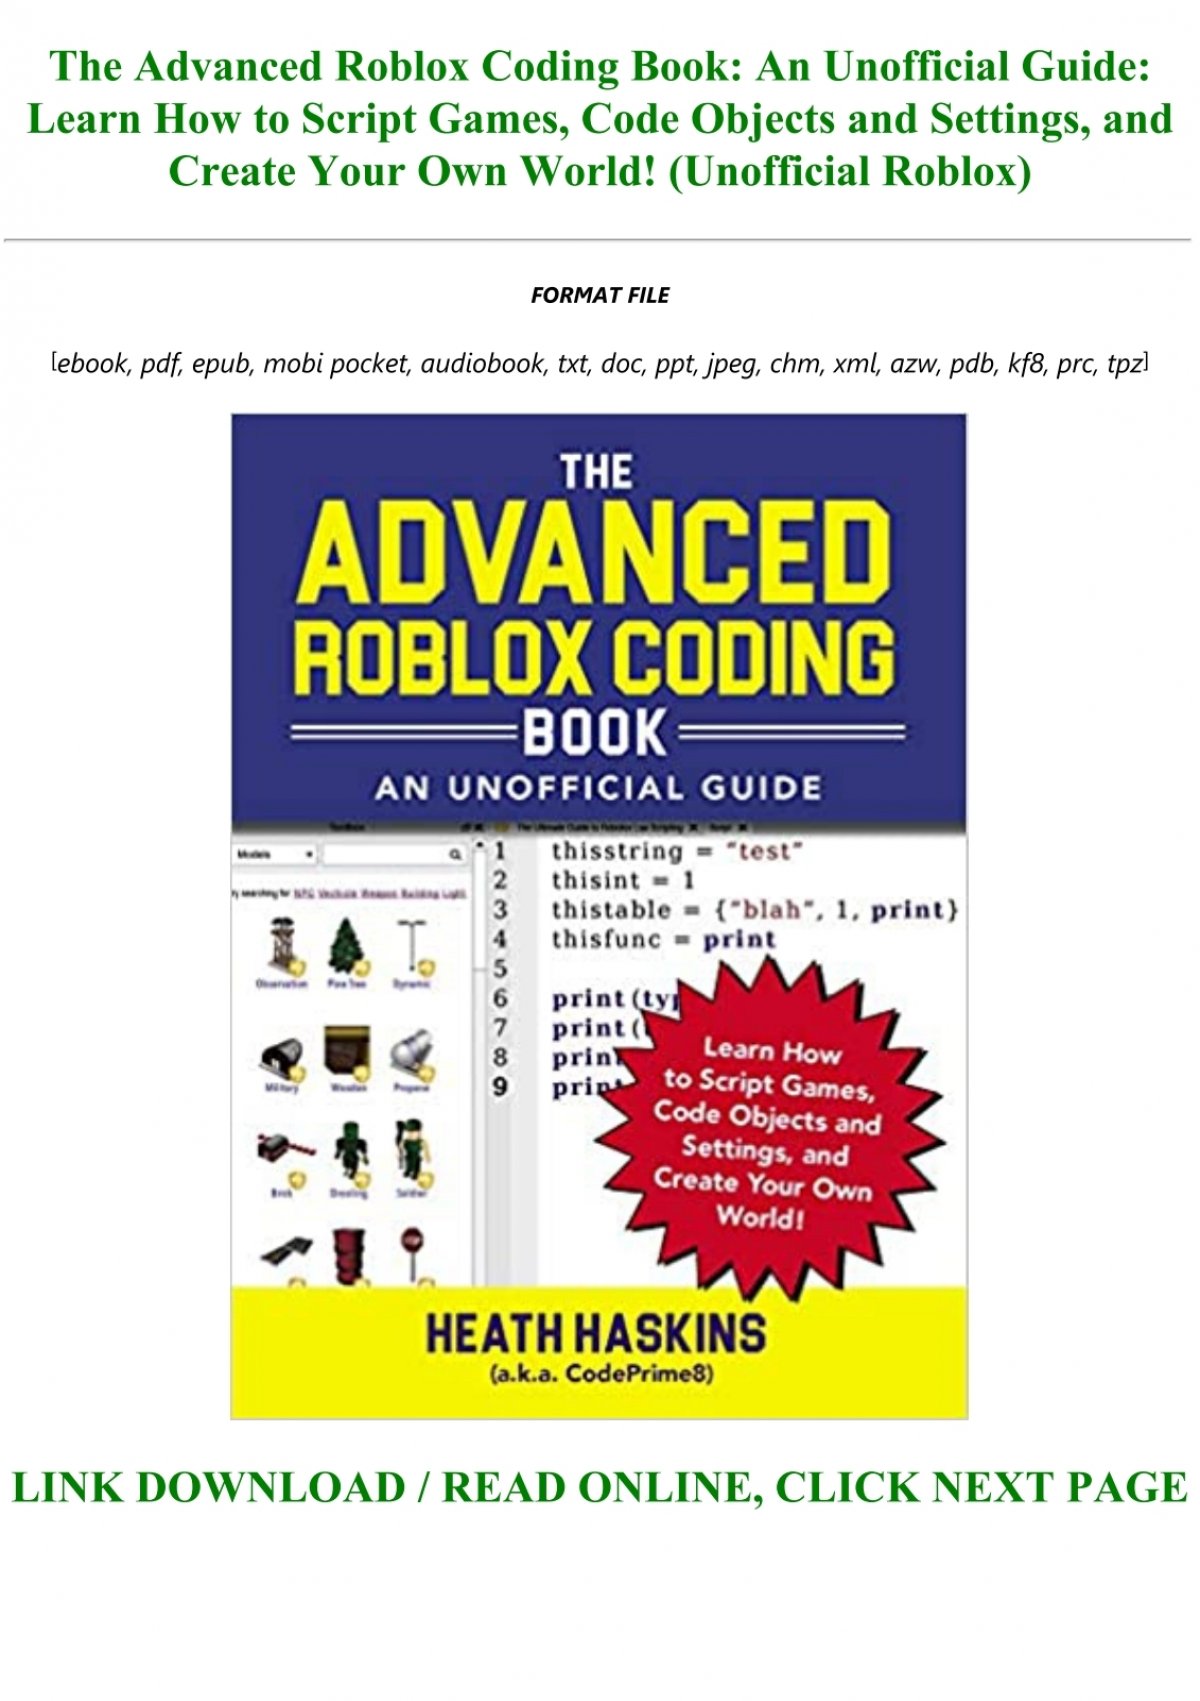 Download Pdf The Advanced Roblox Coding Book An Unofficial Guide Learn How To Script Games Code Objects And Settings And Create Your Own World Unofficial Roblox Pre Order - the advanced roblox coding book pdf by heath haskins the